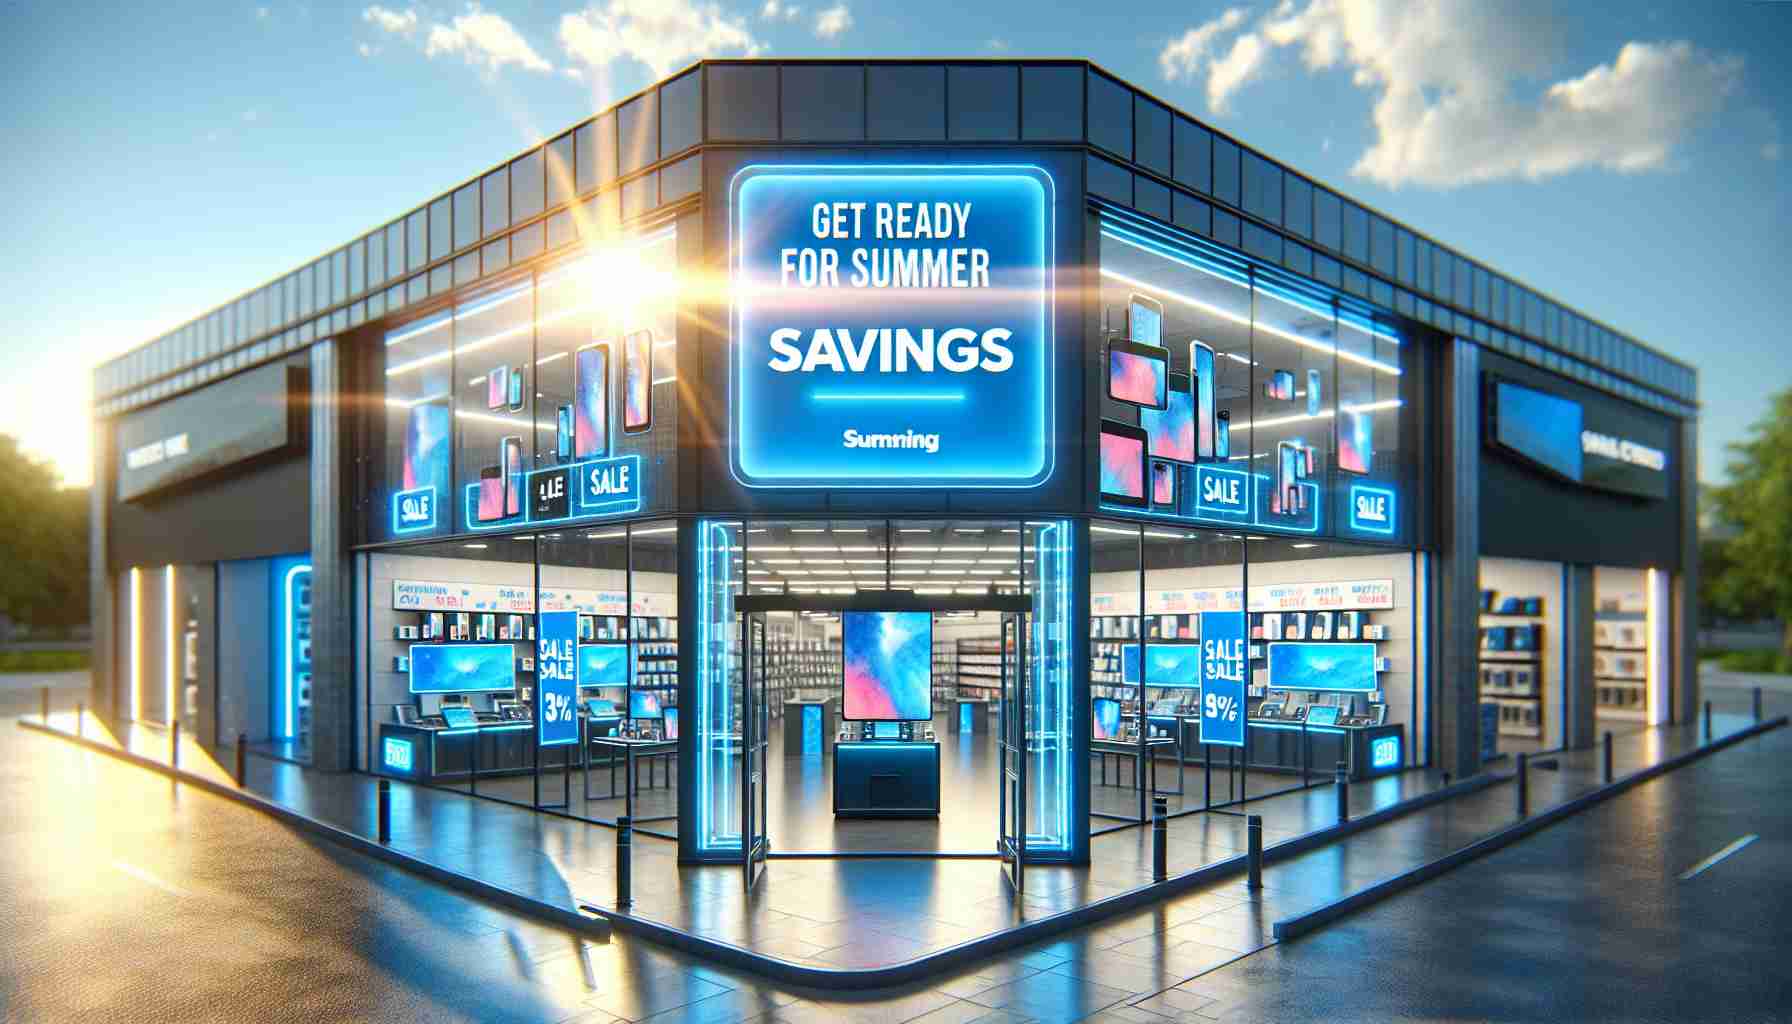 A realistic, high-definition image showcasing a promotional event with the sign 'Get Ready for Summer Savings' at a large electronics retailer. The store's signage reflects a vibrant blue theme, matching the summer sky. Inside, tech devices are neatly displayed with sale tags. Sun rays seeping through the glass doors emphasize the summer mood.